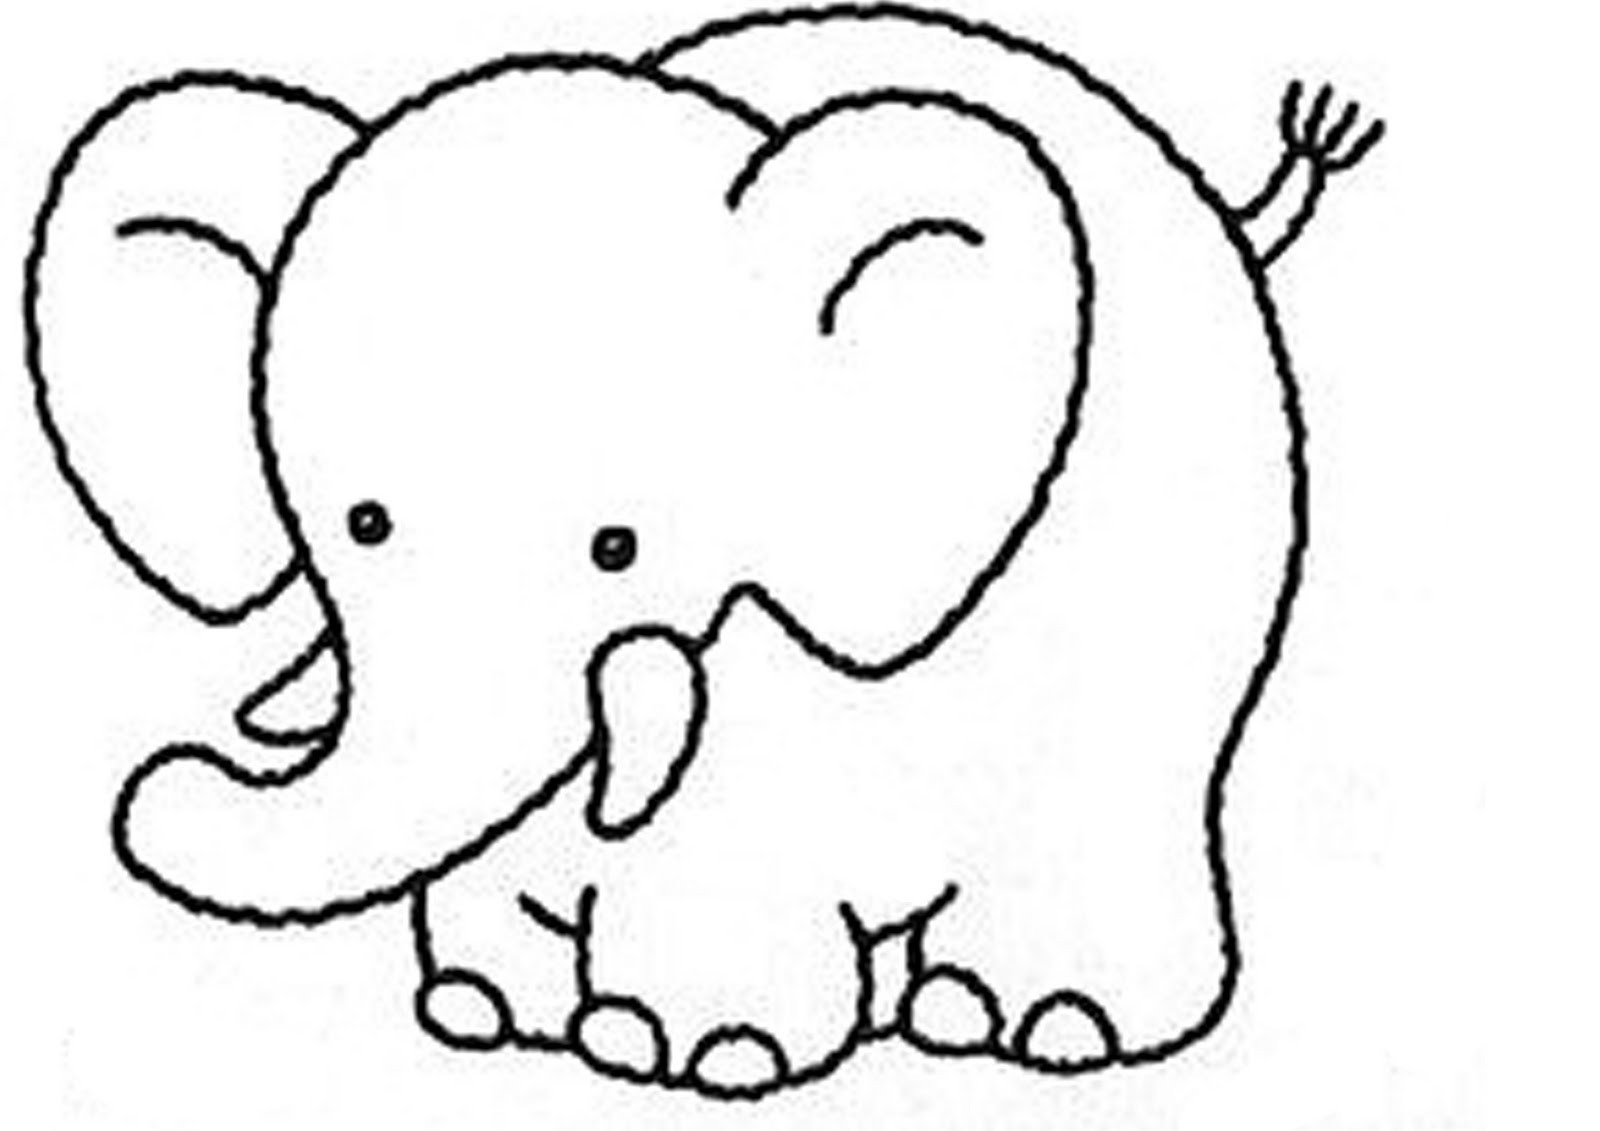 Coloring Pages Of Elephants
 Elephant Coloring Pages For Kids Preschool and Kindergarten